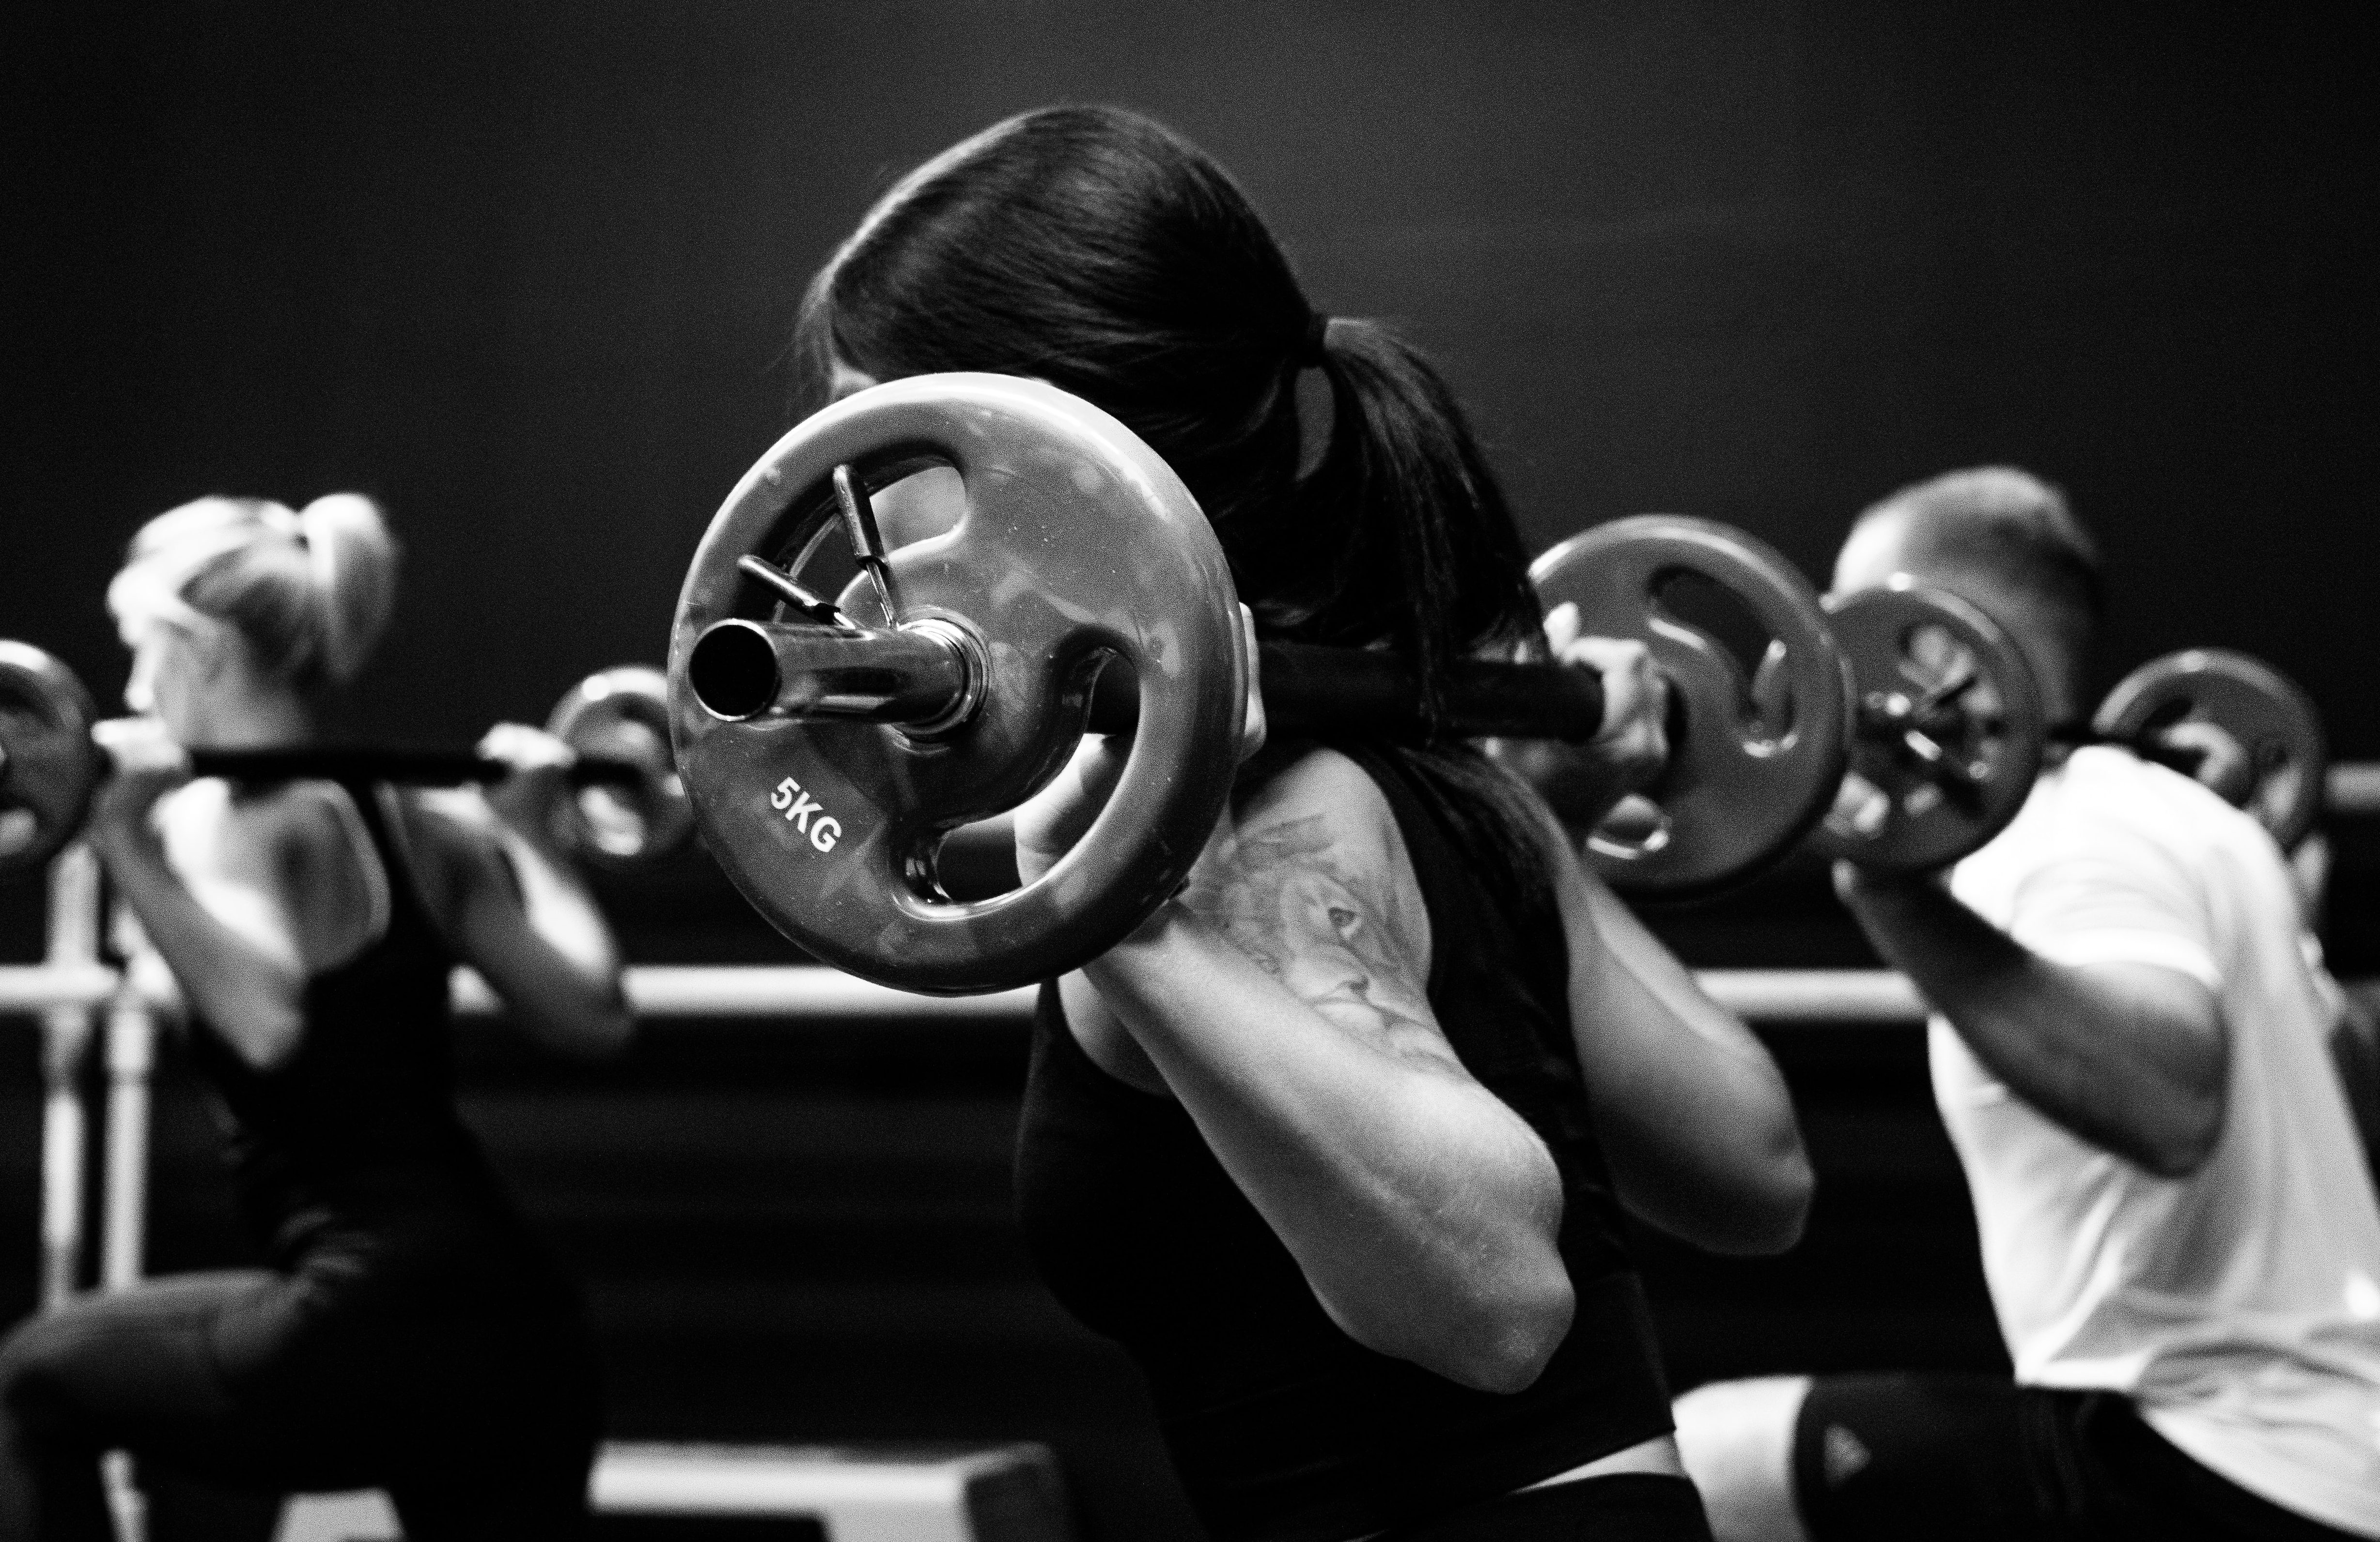 Black and white image of a person lifting weights